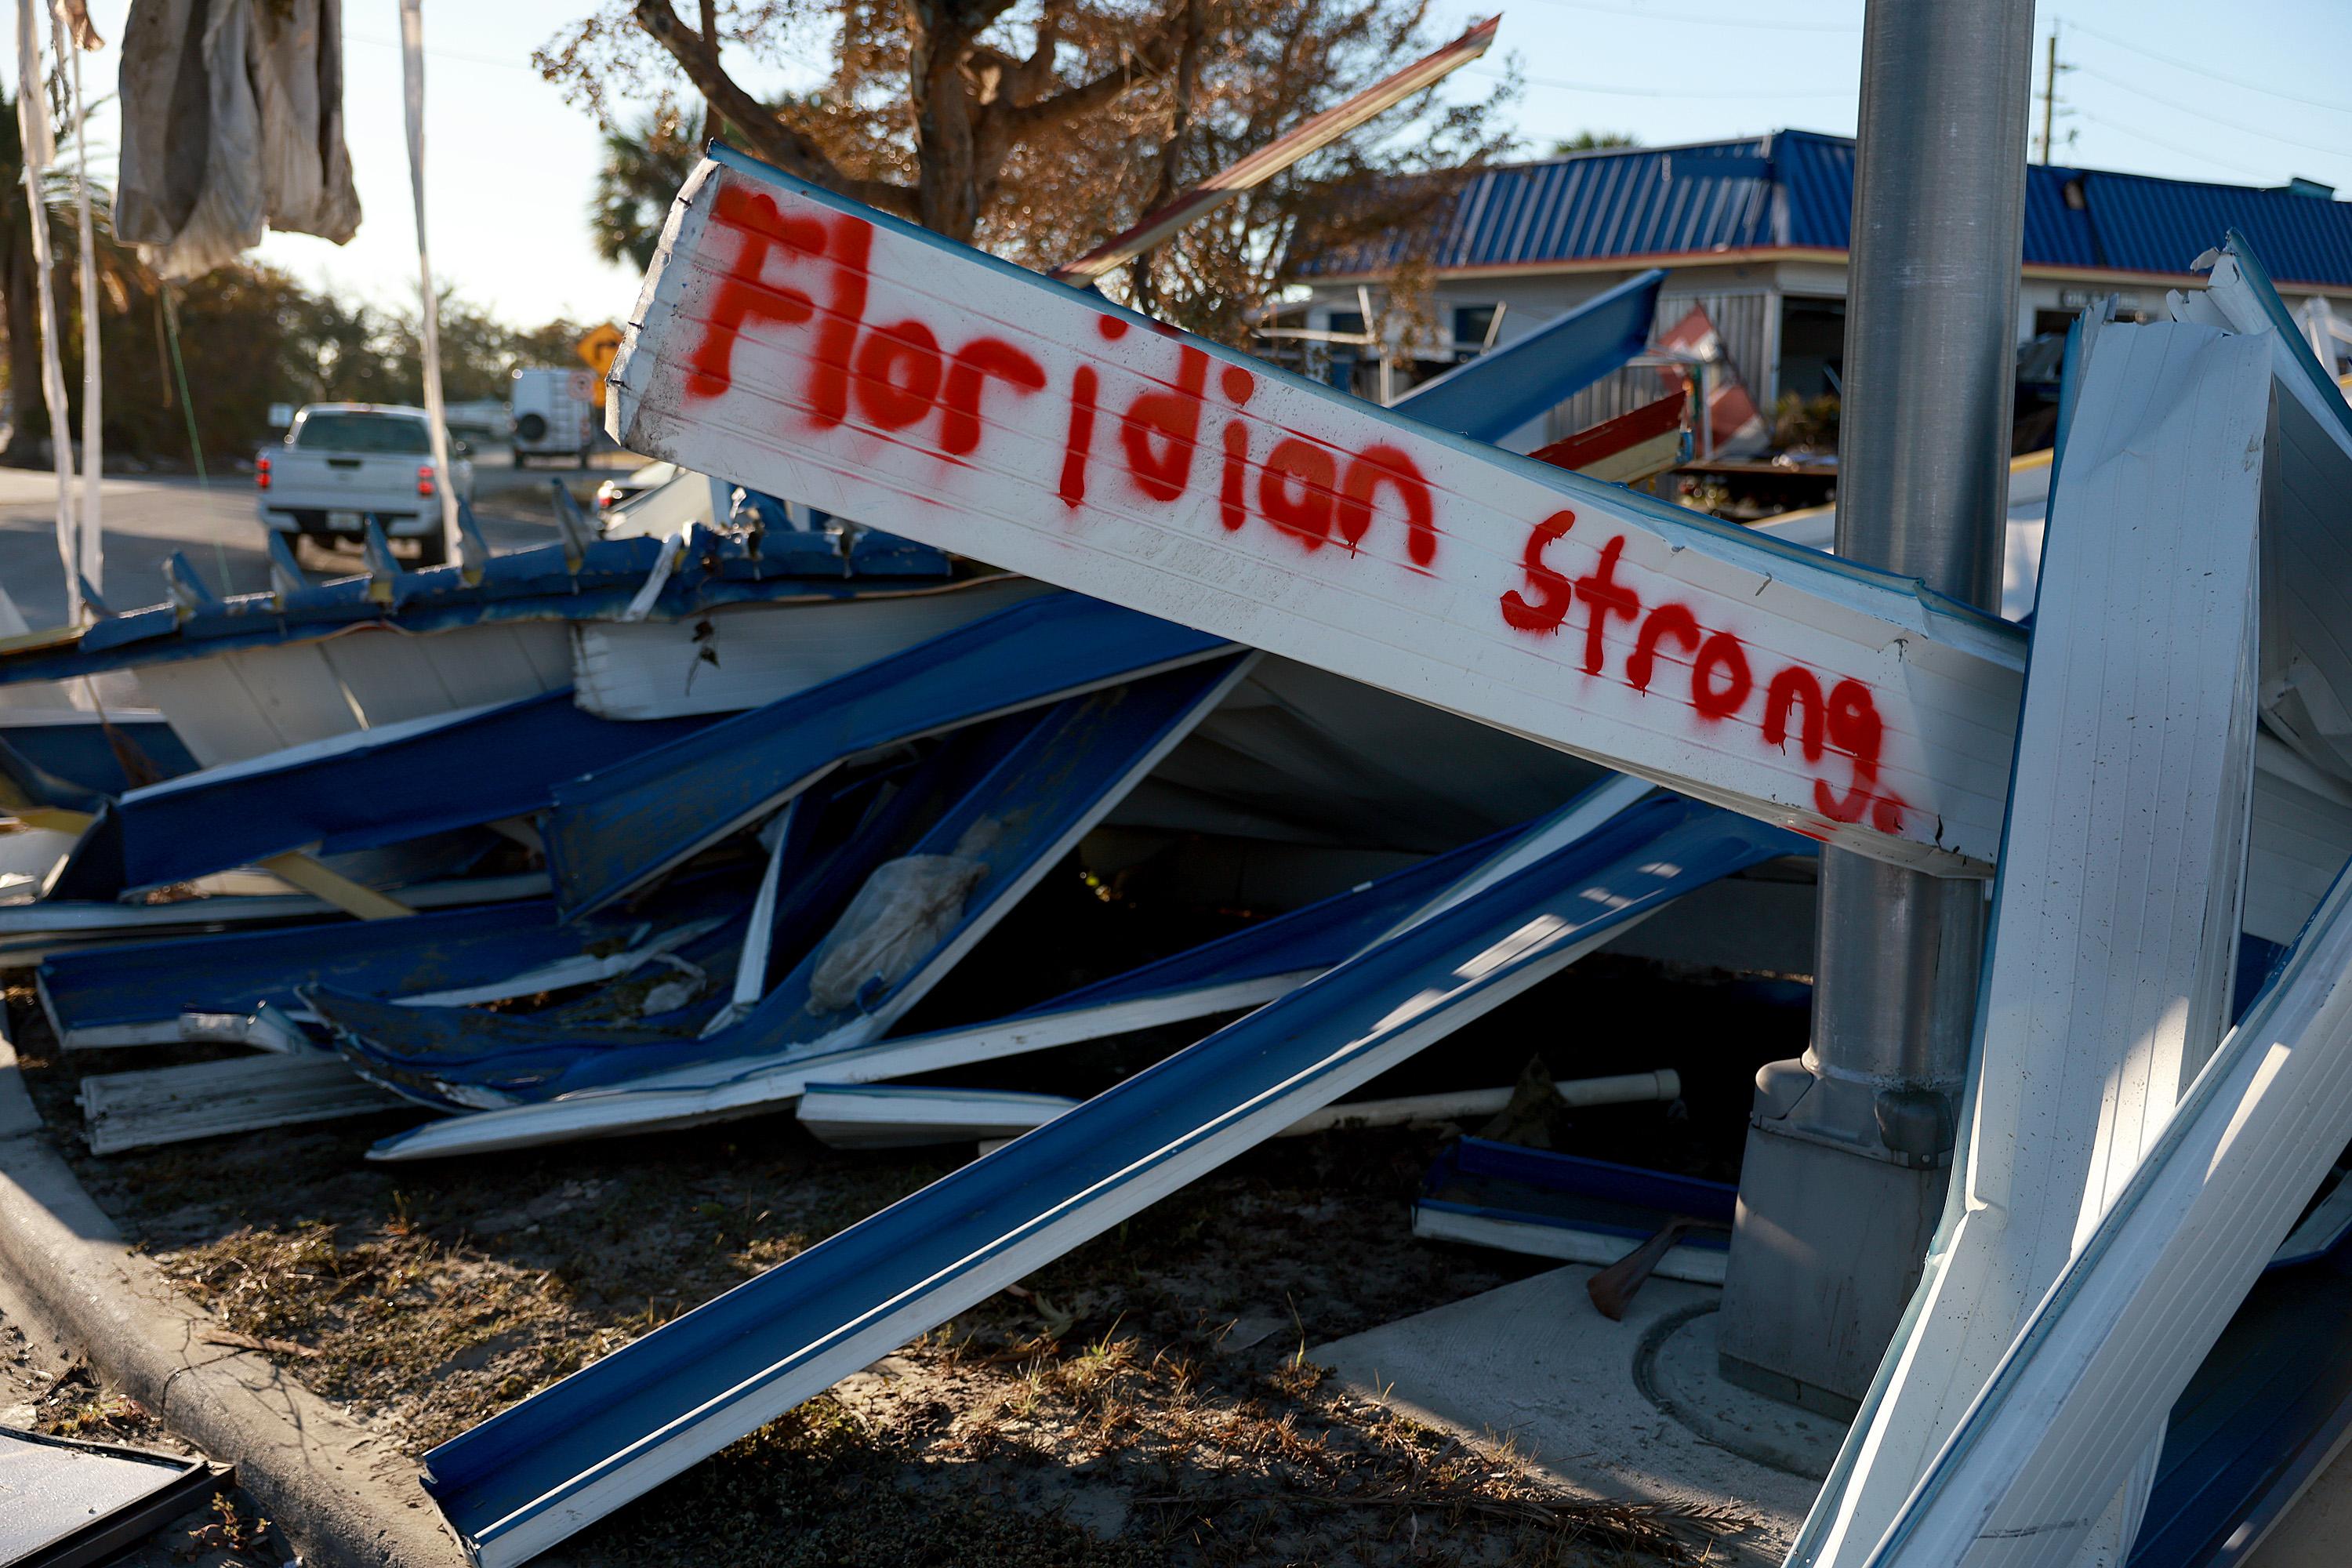 A spray-painted sign reading "Floridian Strong" lies among debris.